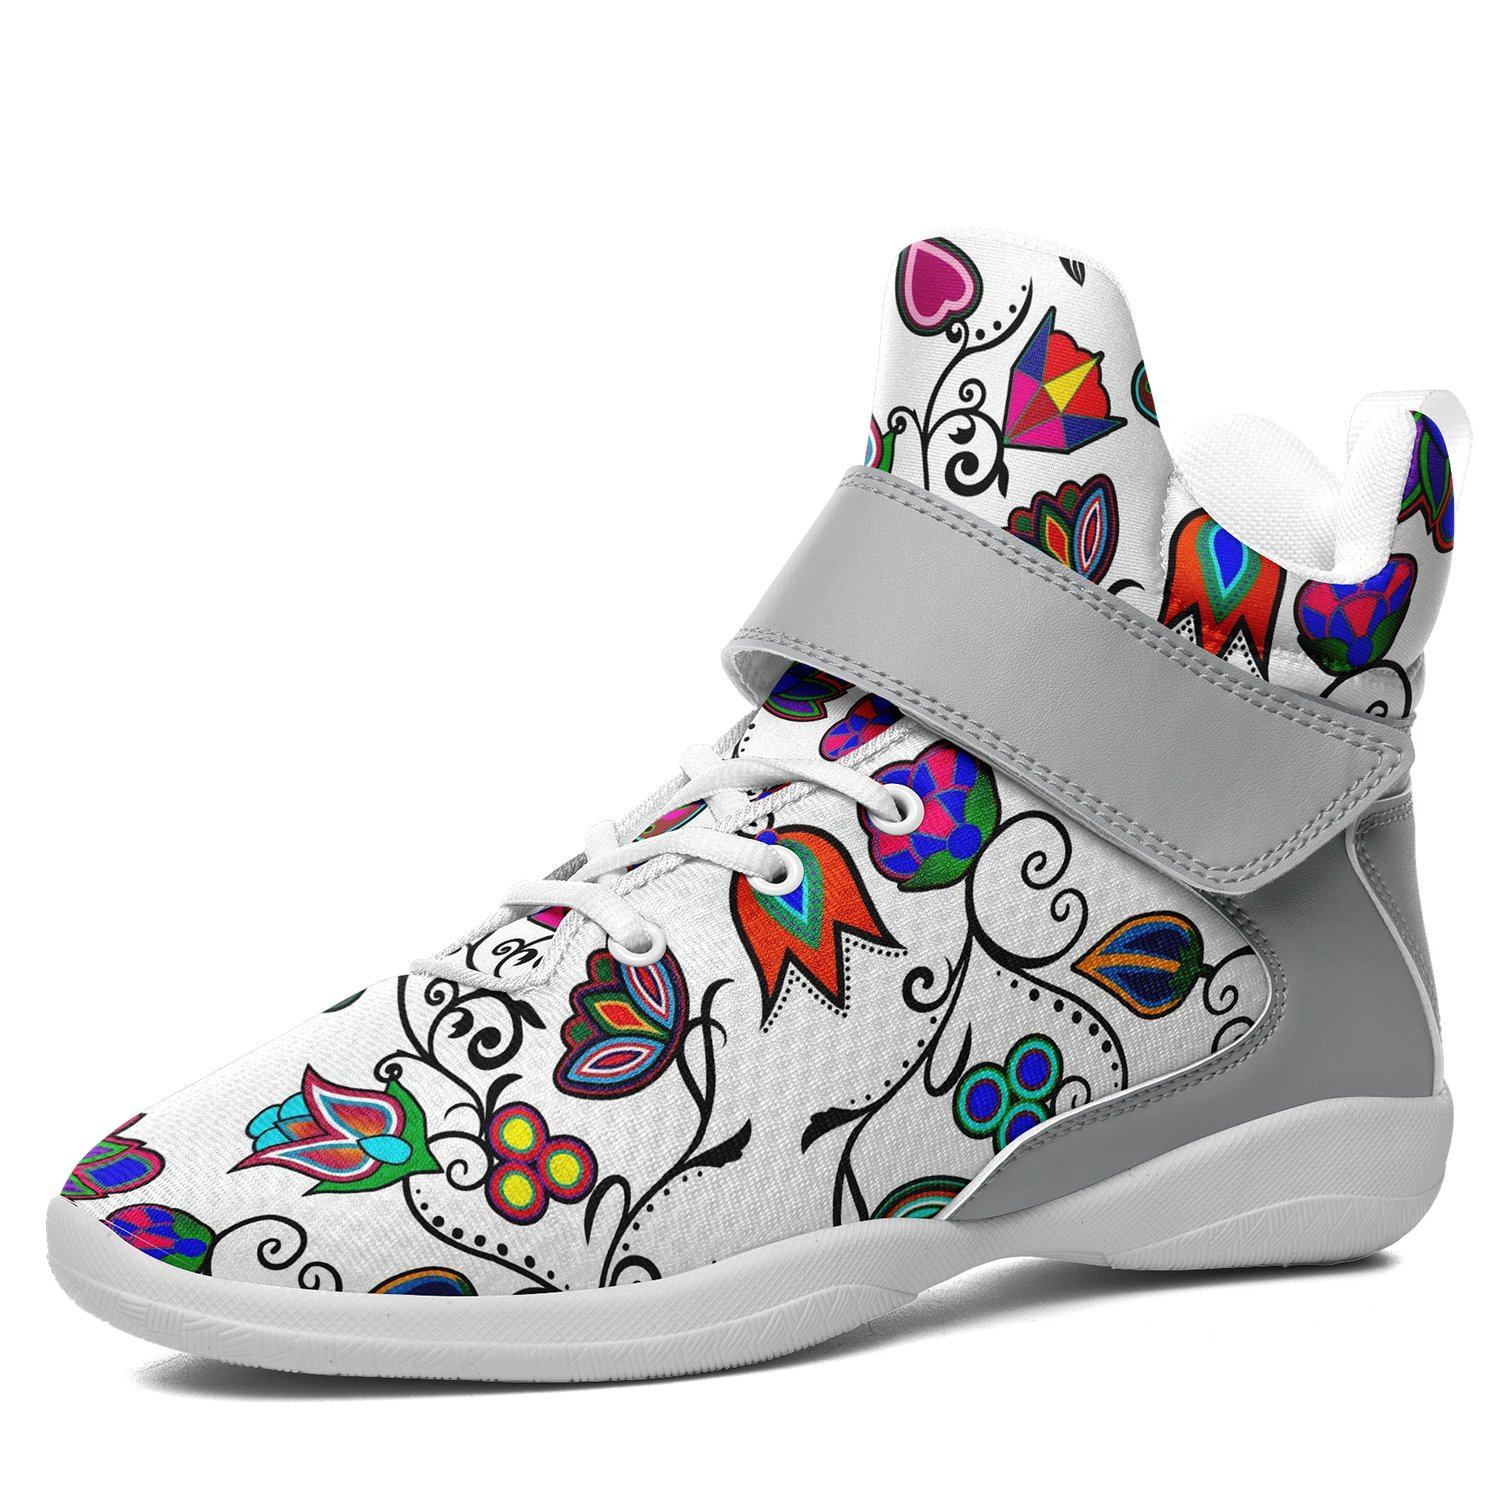 Indigenous Paisley White Ipottaa Basketball / Sport High Top Shoes - White Sole 49 Dzine US Men 7 / EUR 40 White Sole with Gray Strap 